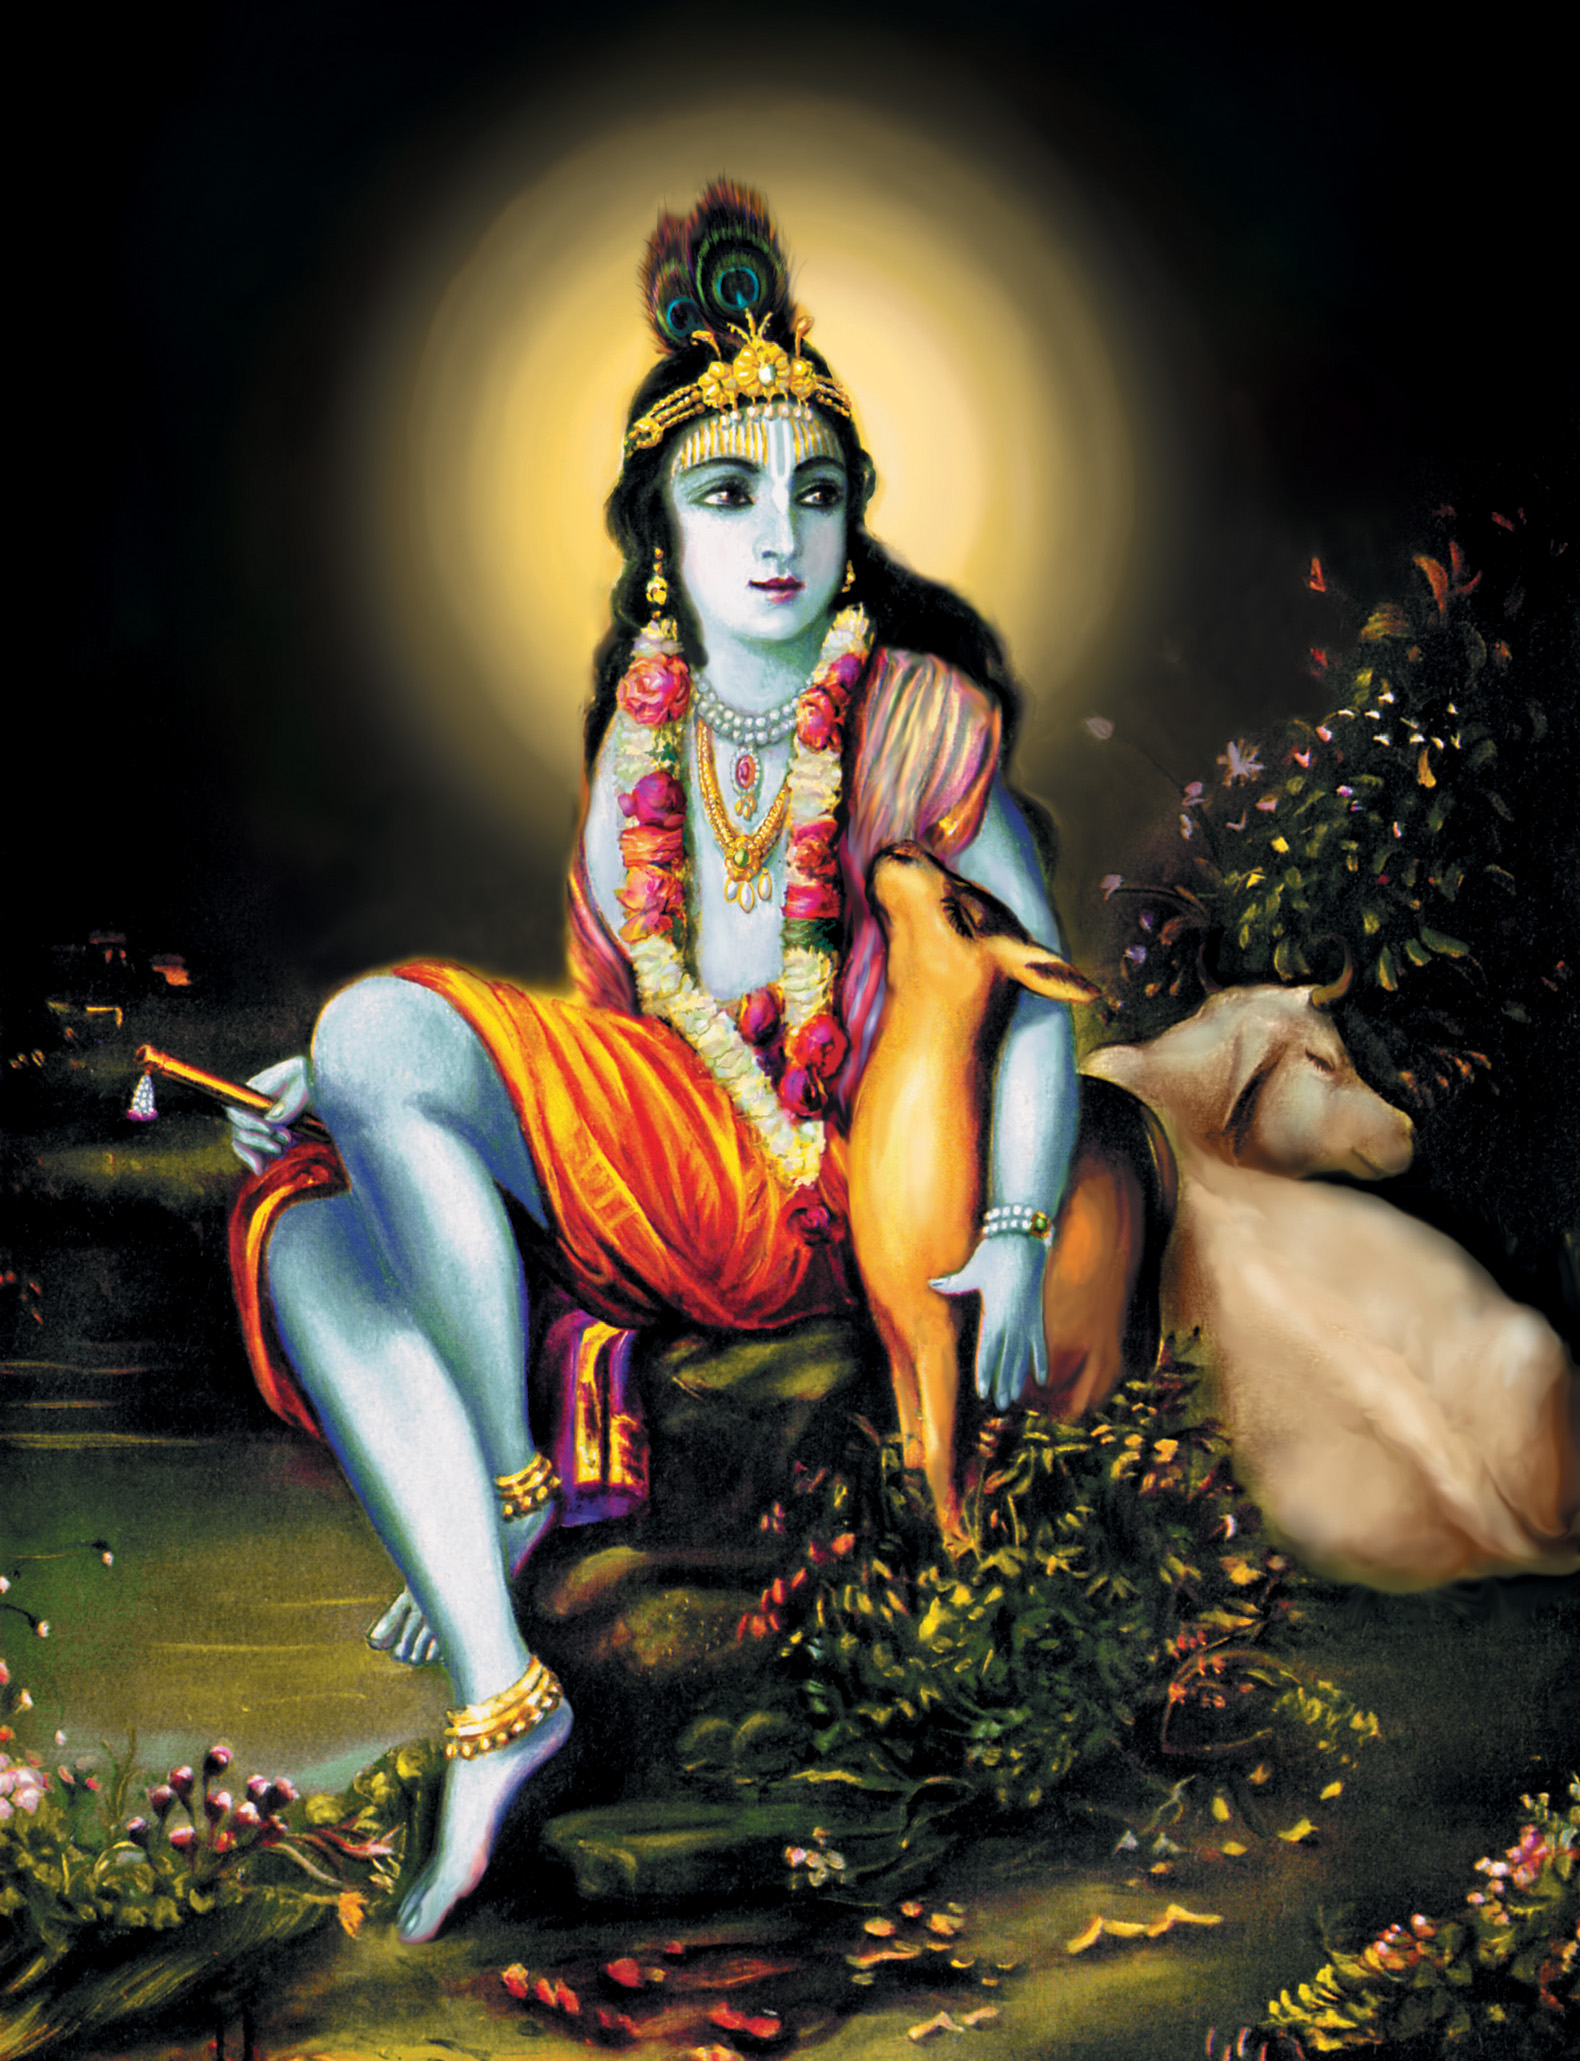 Bhagavad Gita: Always think of Me and become My devotee. Worship Me and offer your homage unto Me.